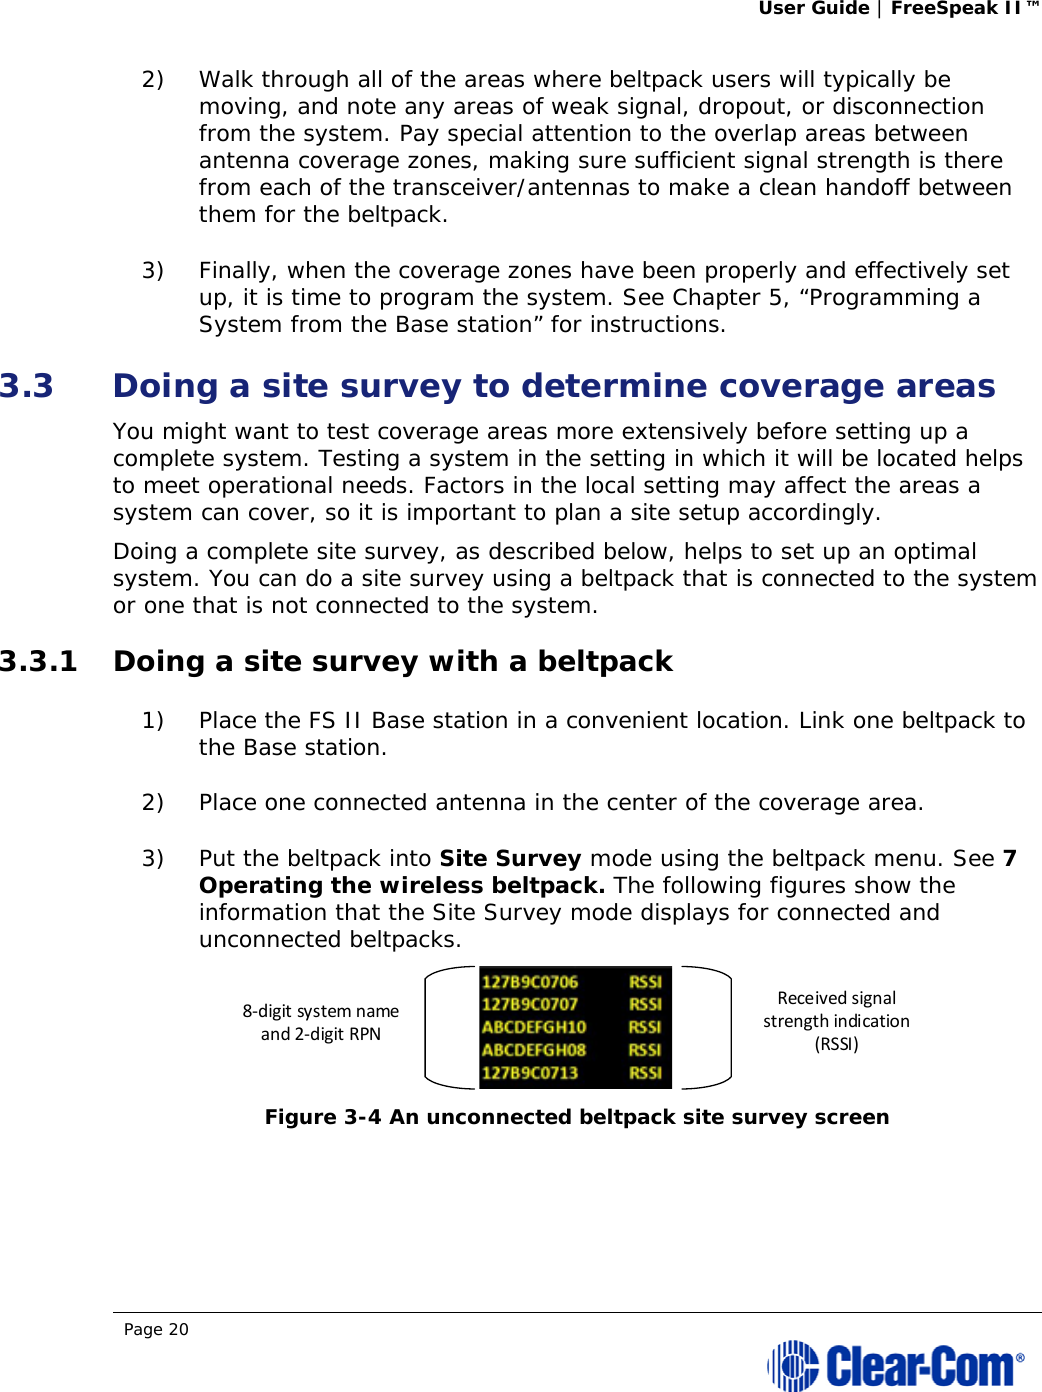 User Guide | FreeSpeak II™  Page 20  2) Walk through all of the areas where beltpack users will typically be moving, and note any areas of weak signal, dropout, or disconnection from the system. Pay special attention to the overlap areas between antenna coverage zones, making sure sufficient signal strength is there from each of the transceiver/antennas to make a clean handoff between them for the beltpack.  3) Finally, when the coverage zones have been properly and effectively set up, it is time to program the system. See Chapter 5, “Programming a System from the Base station” for instructions. 3.3 Doing a site survey to determine coverage areas  You might want to test coverage areas more extensively before setting up a complete system. Testing a system in the setting in which it will be located helps to meet operational needs. Factors in the local setting may affect the areas a system can cover, so it is important to plan a site setup accordingly. Doing a complete site survey, as described below, helps to set up an optimal system. You can do a site survey using a beltpack that is connected to the system or one that is not connected to the system. 3.3.1 Doing a site survey with a beltpack 1) Place the FS II Base station in a convenient location. Link one beltpack to the Base station.  2) Place one connected antenna in the center of the coverage area.  3) Put the beltpack into Site Survey mode using the beltpack menu. See 7 Operating the wireless beltpack. The following figures show the information that the Site Survey mode displays for connected and unconnected beltpacks.  Figure 3-4 An unconnected beltpack site survey screen  Receivedsignalstrengthindication(RSSI)8‐digitsystemnameand2‐digitRPN